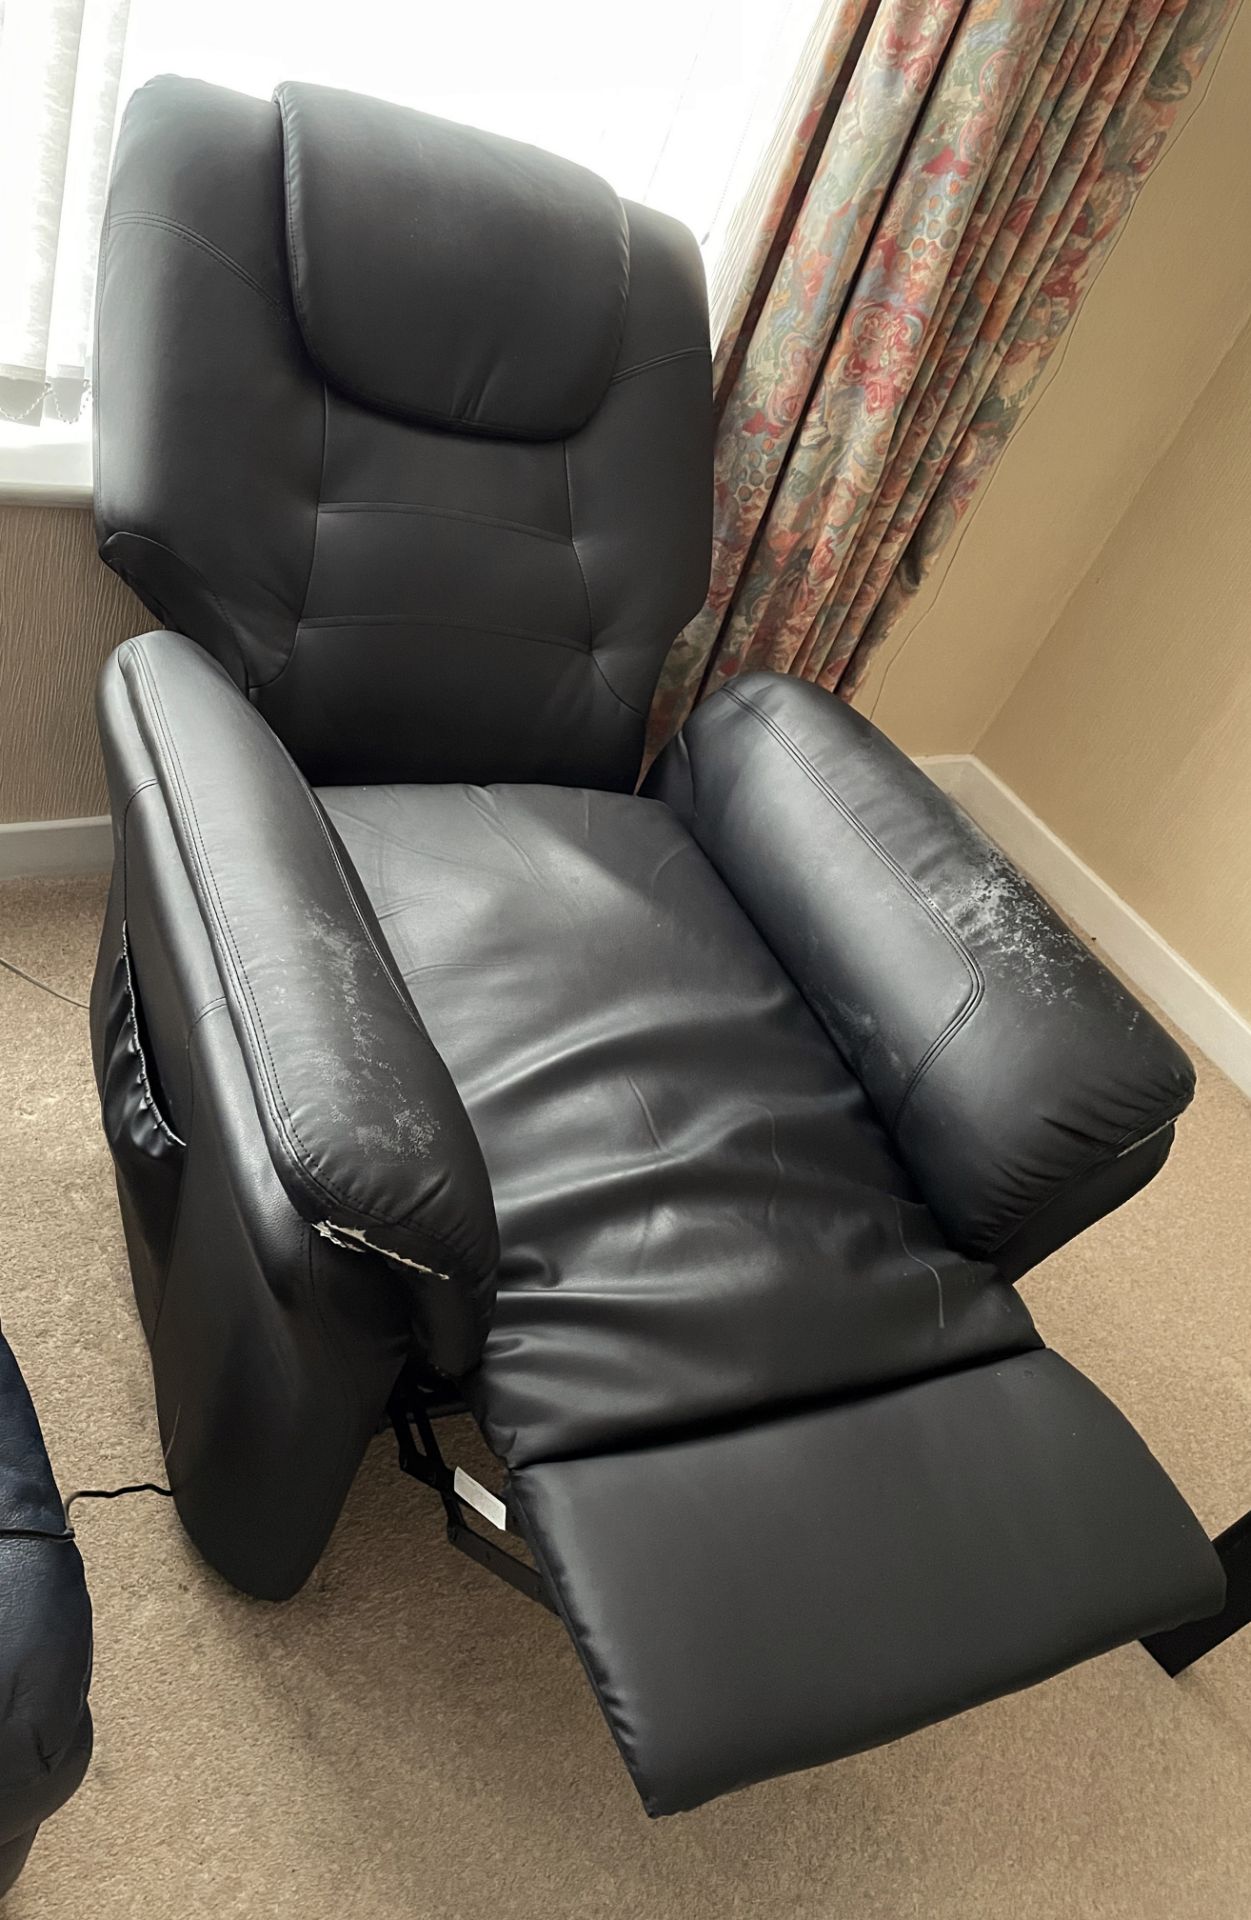 1 x Stylish Motorised Recliner Chair In Black - From An Exclusive Property In Leeds - No VAT on - Image 5 of 7